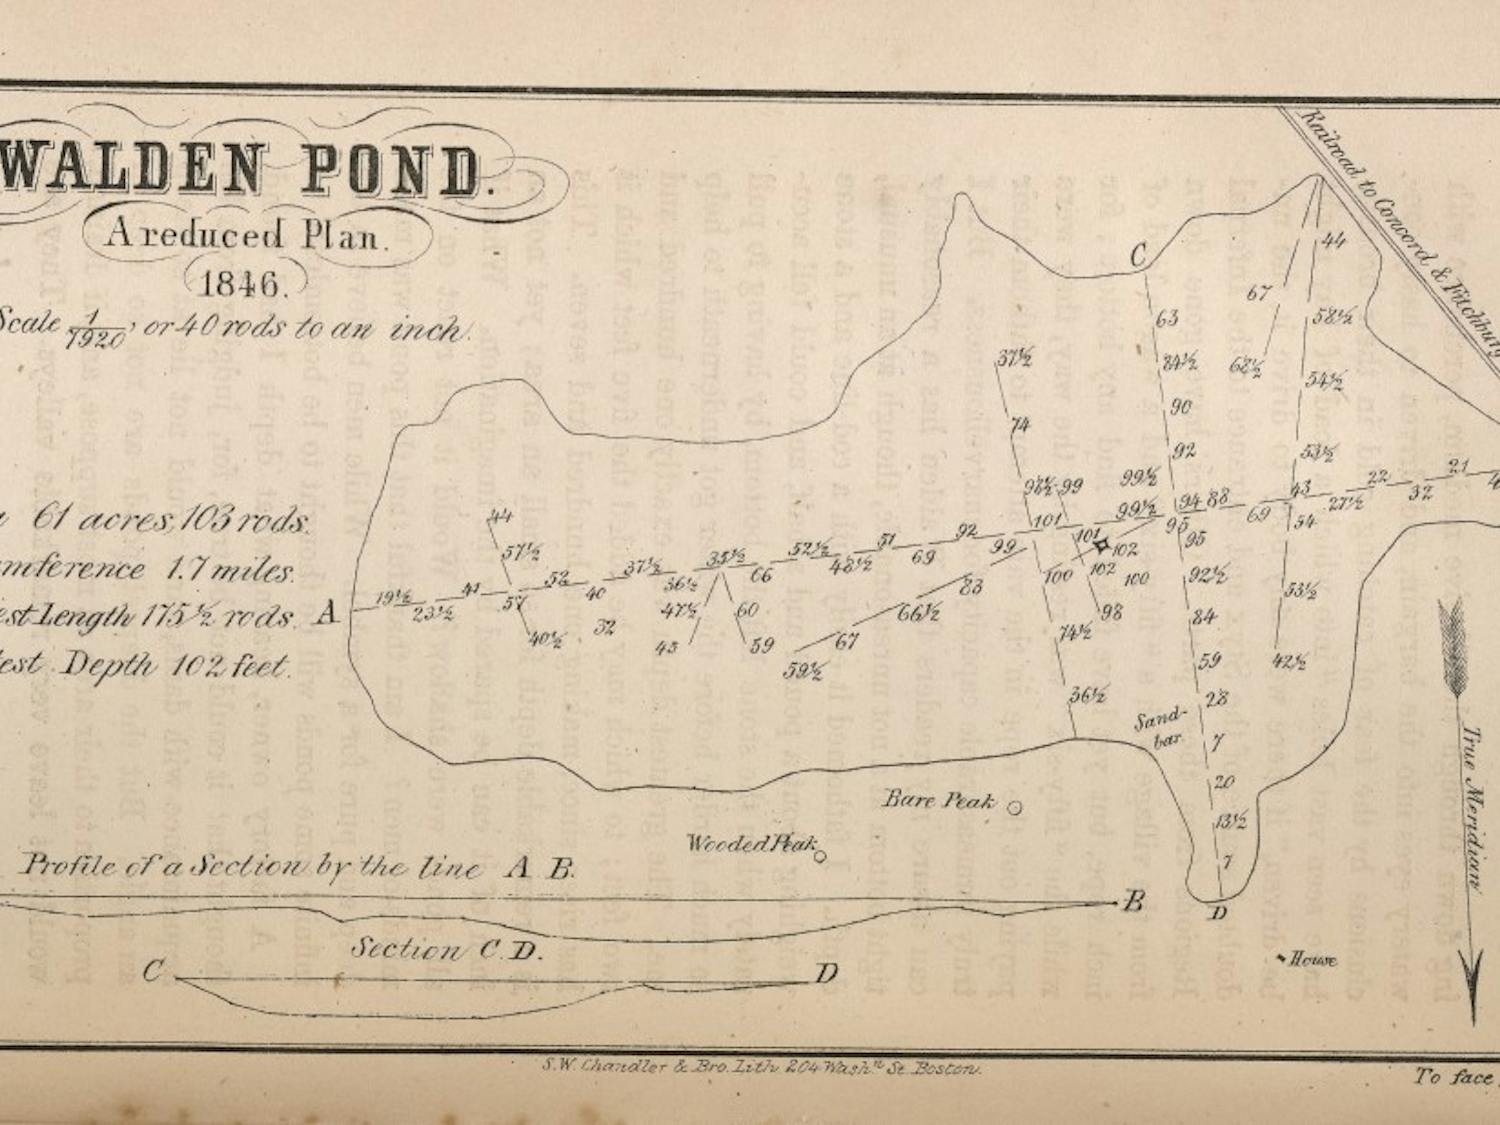 Henry David Thoreau's drawing of Walden pond is just one of many cool documents within the Rubenstein Library.